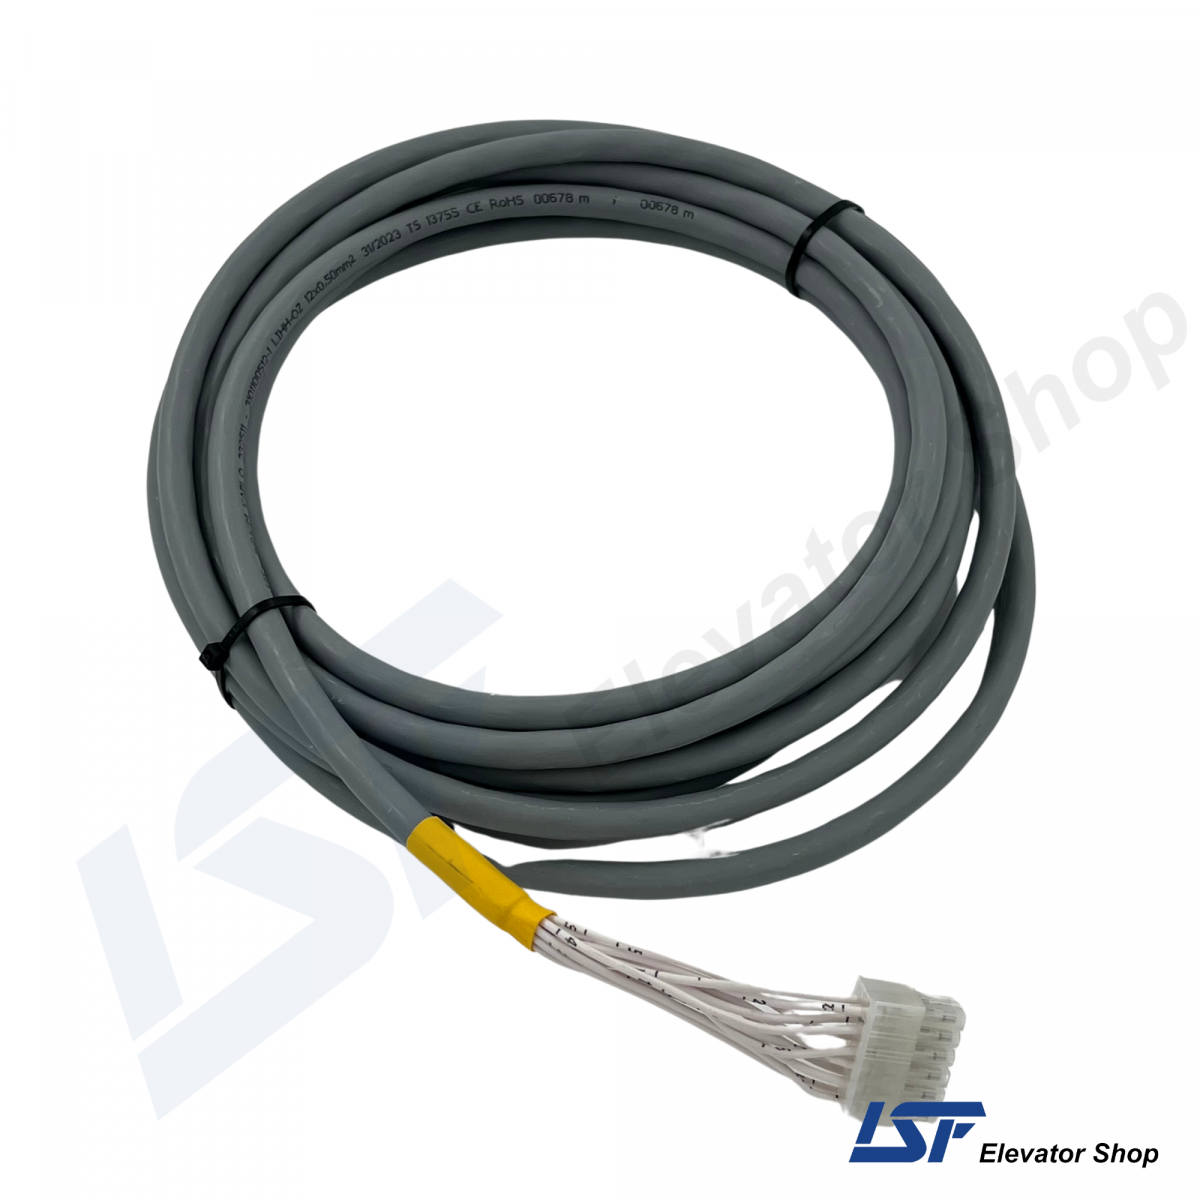 KBL-ACOP Cable for Elevator Systems